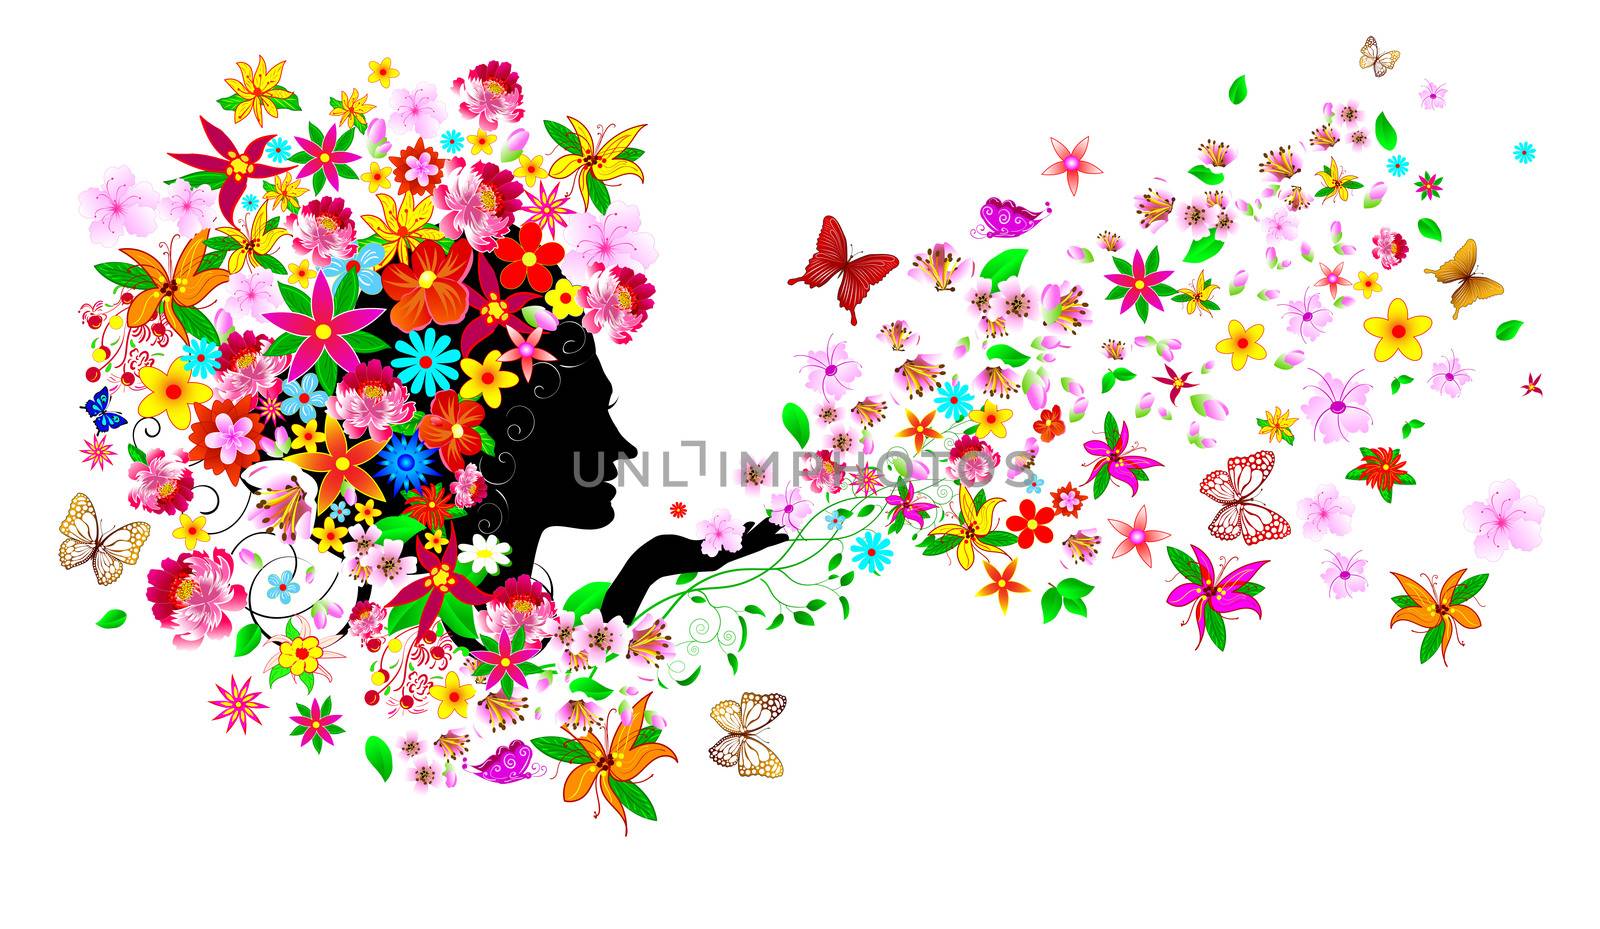 Silhouette of a woman's face among flowers and butterflies. Girl with flowers and butterflies.A girl with flowers and butterflies on her head and in her hair.                                                                                                                                                                                                                                                                                                                                                                            